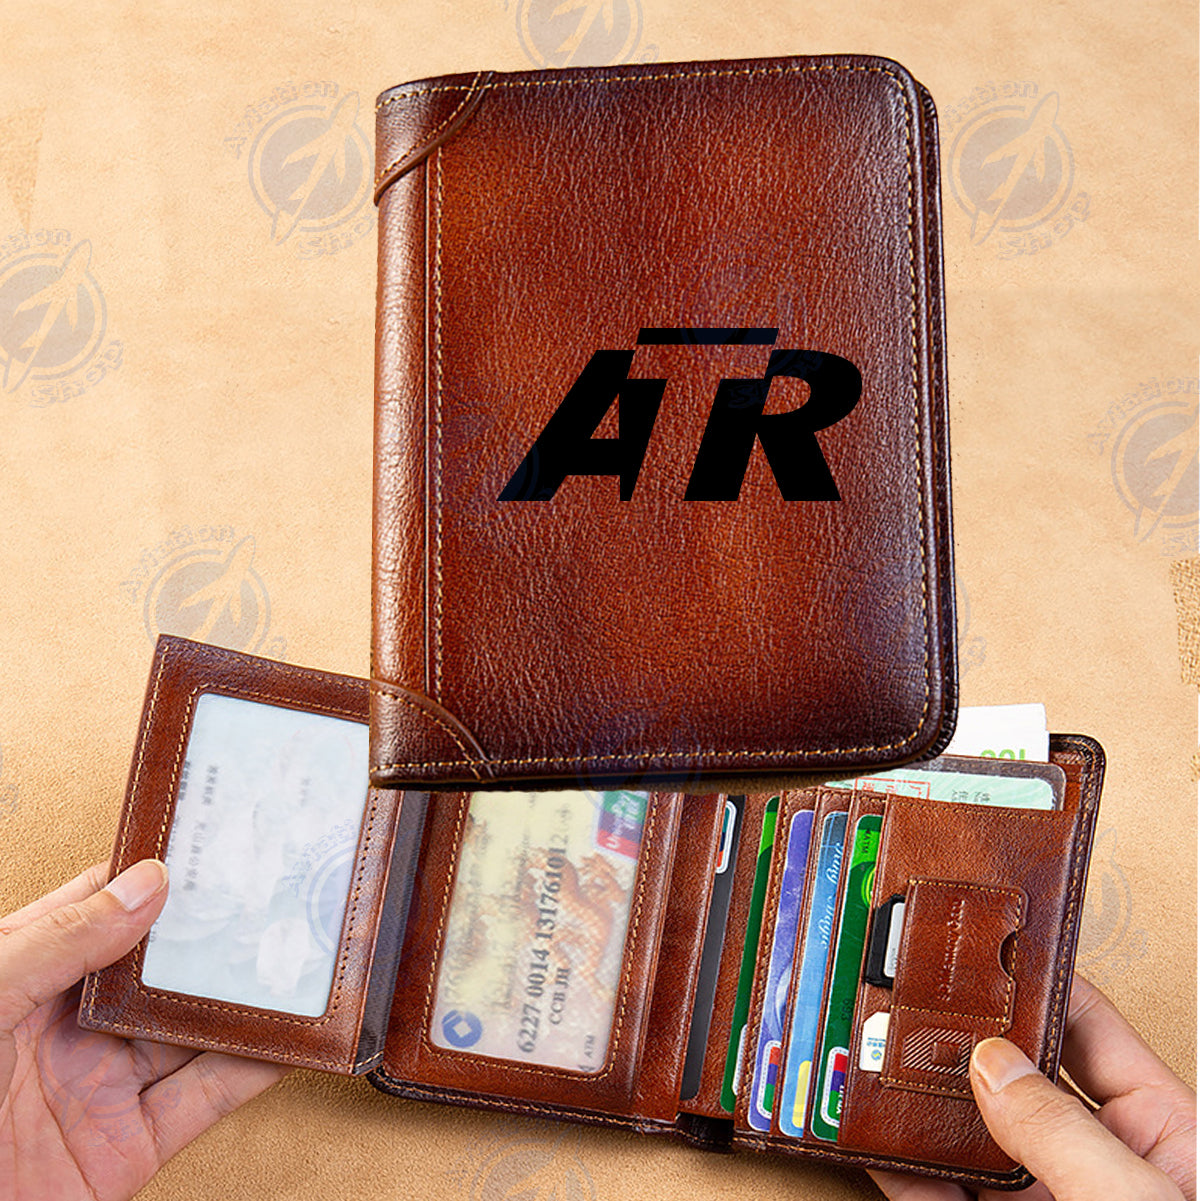 ATR & Text Designed Leather Wallets